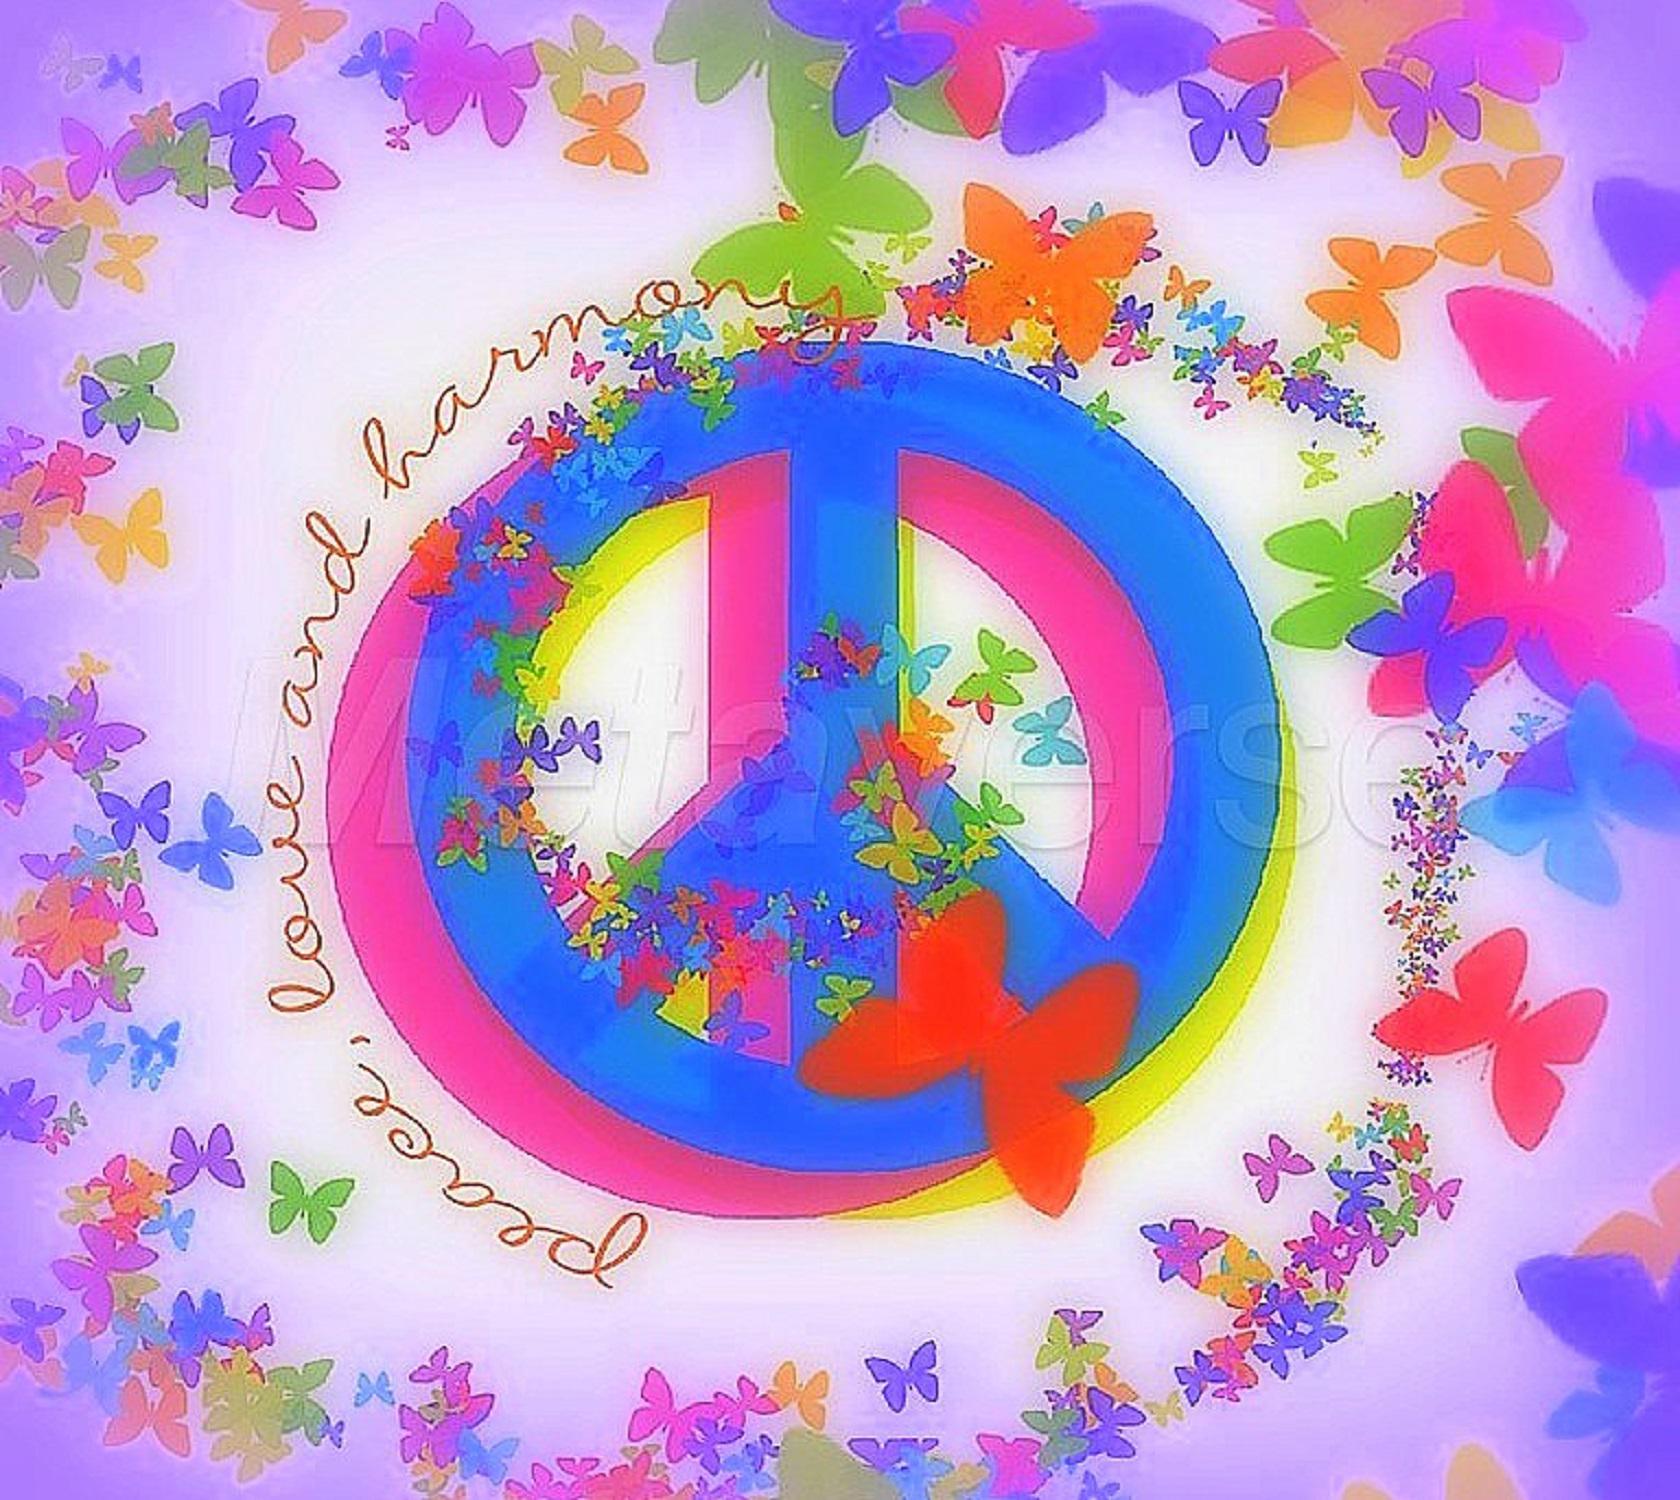 Love peace harmony - - High Quality and Resolution